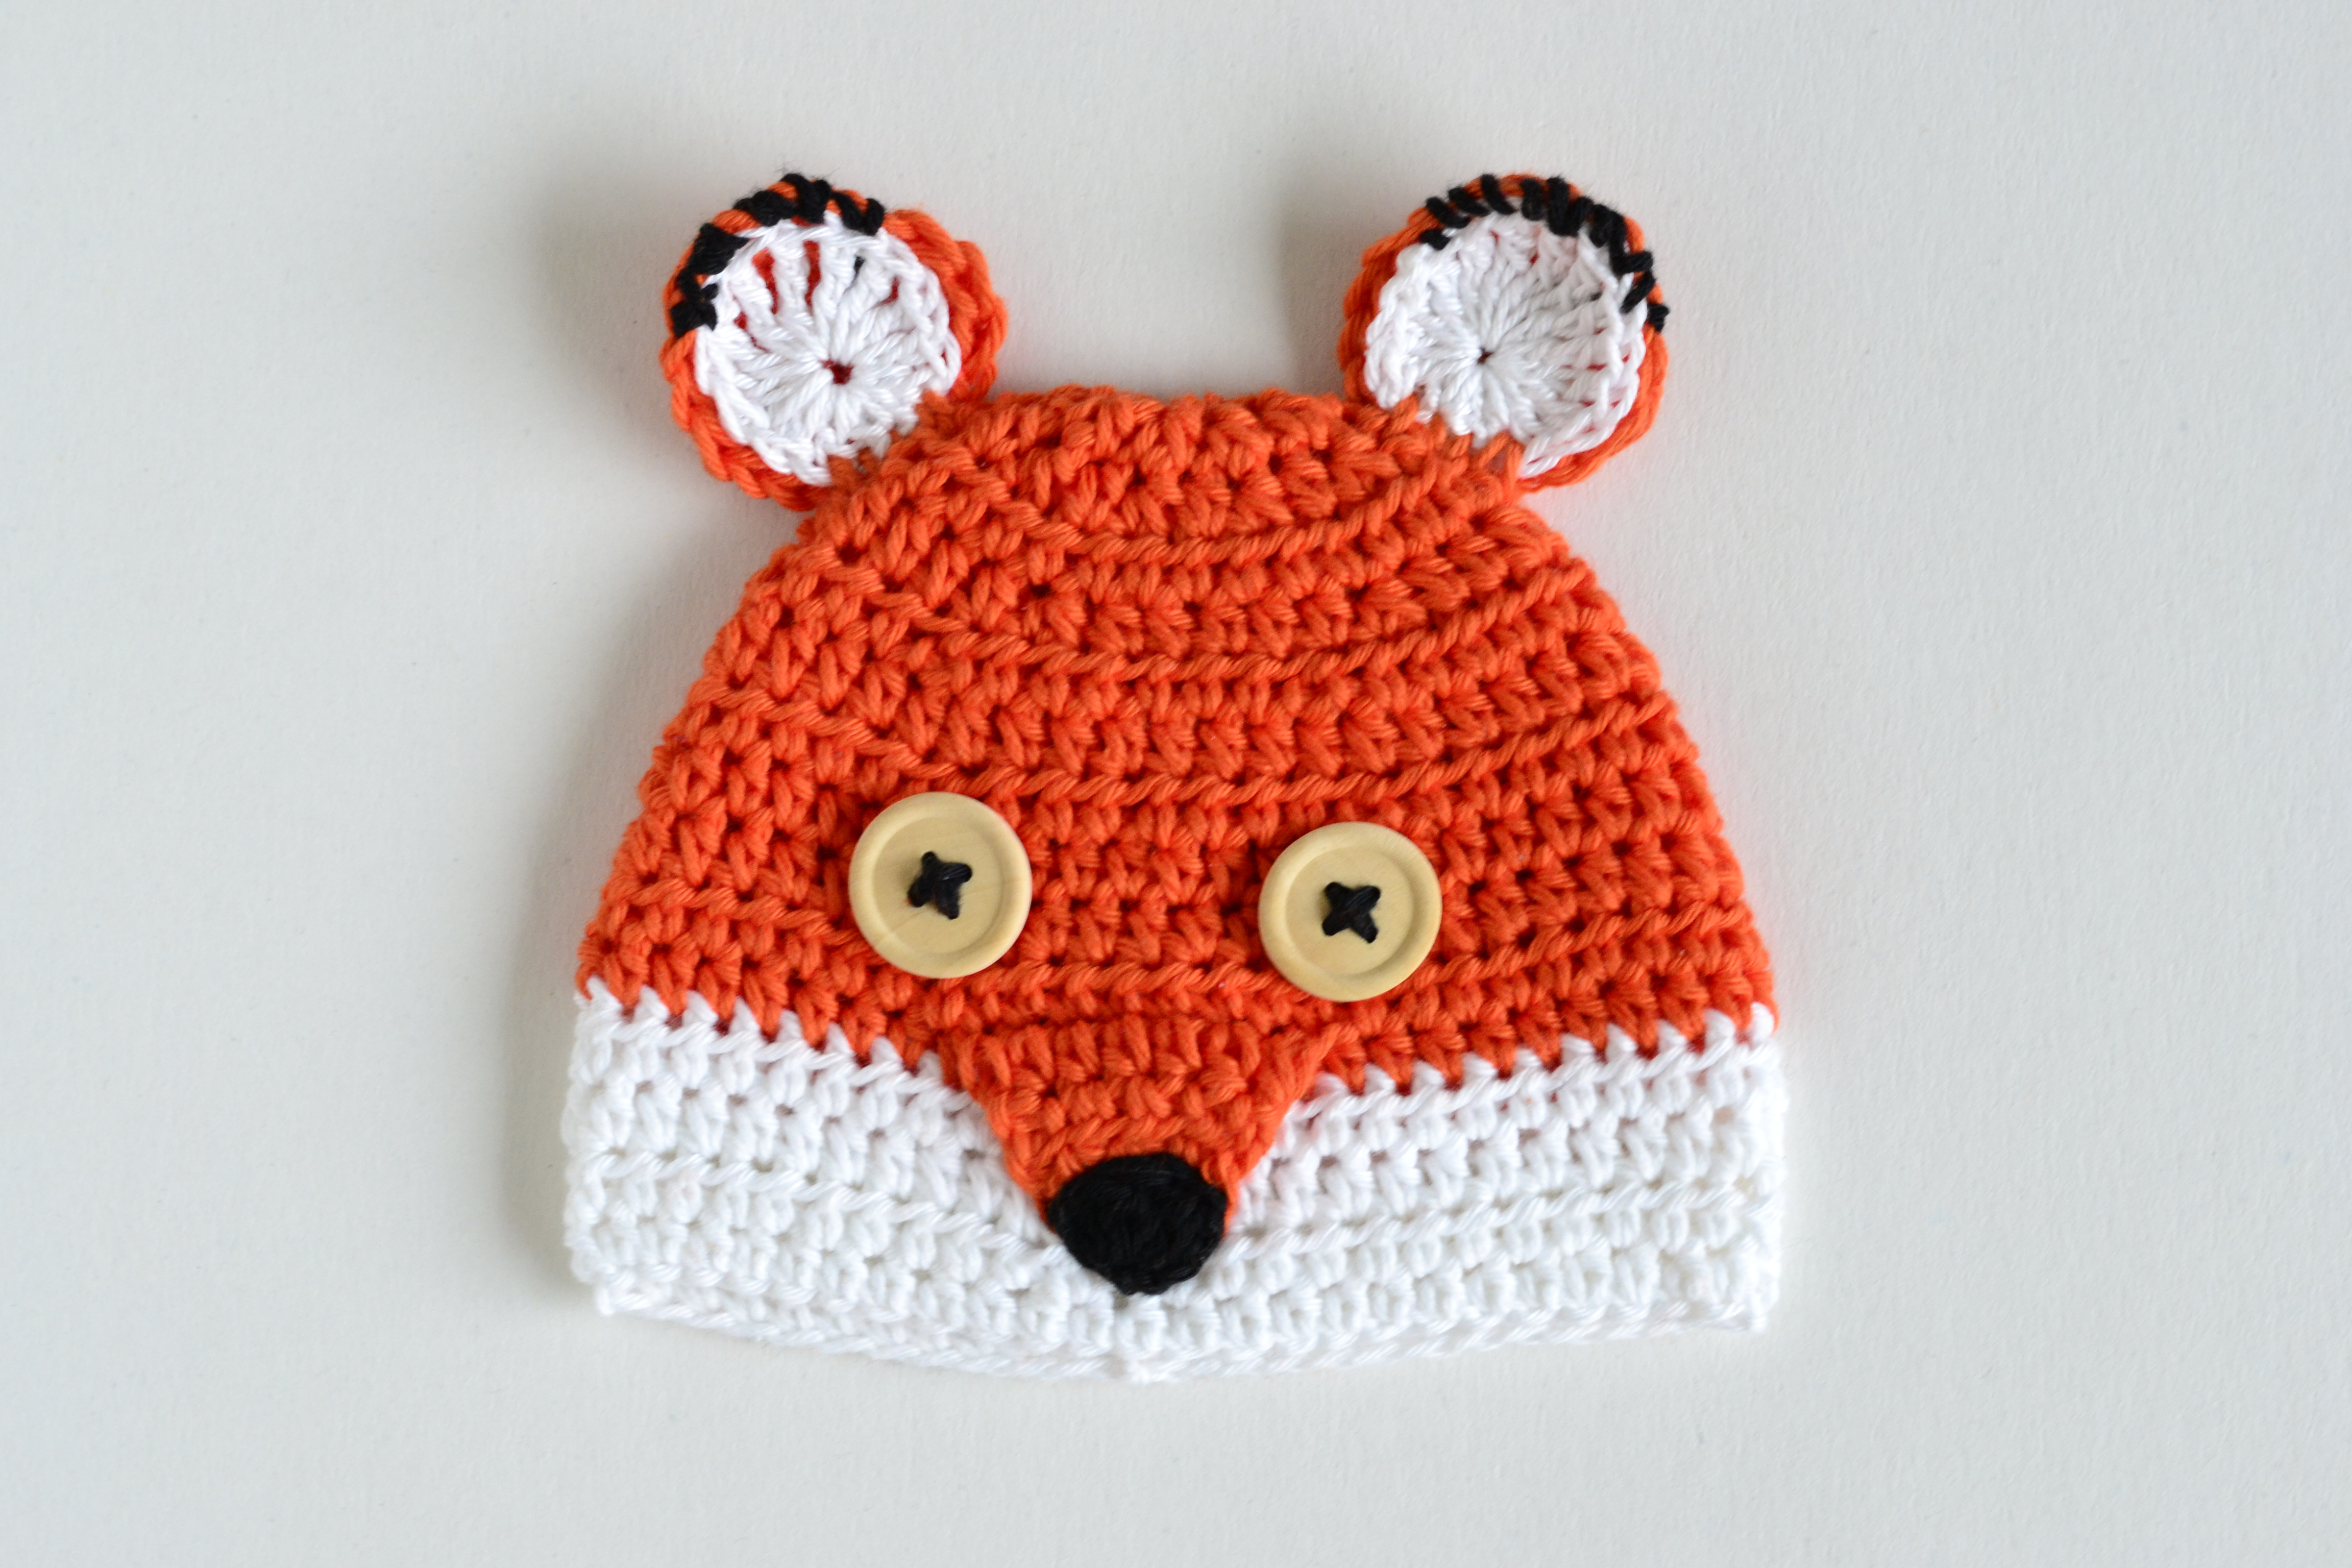 Crochet Baby Hat And Diaper Cover Pattern Crochet Ba Hat And Diaper Cover Cute Fox Cro Patterns